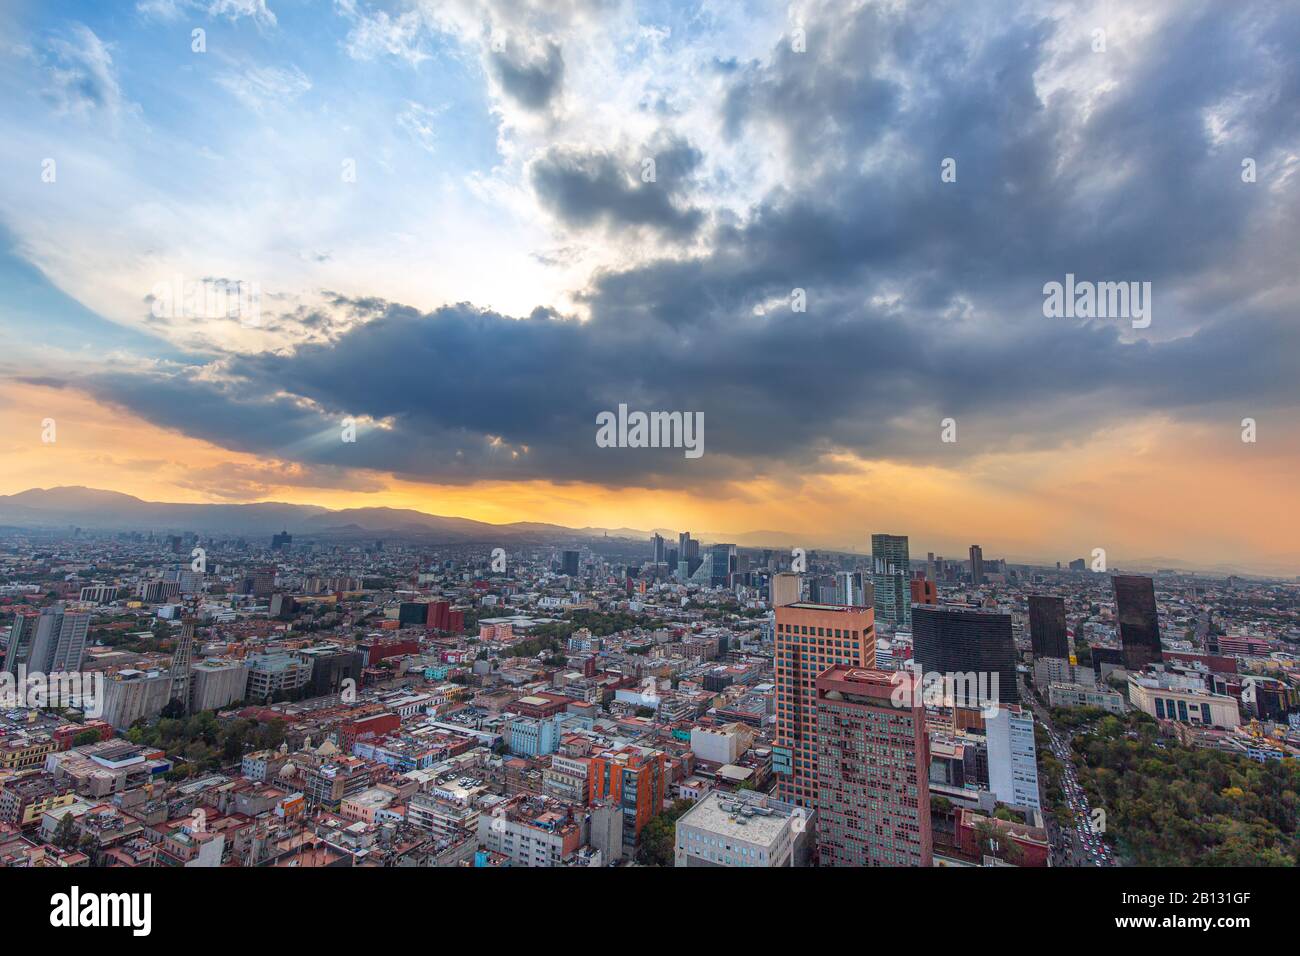 Scenic panoramic view of Mexico City center from the observation deck at the top of Latin American Tower (Torre Latinoamericana) Stock Photo